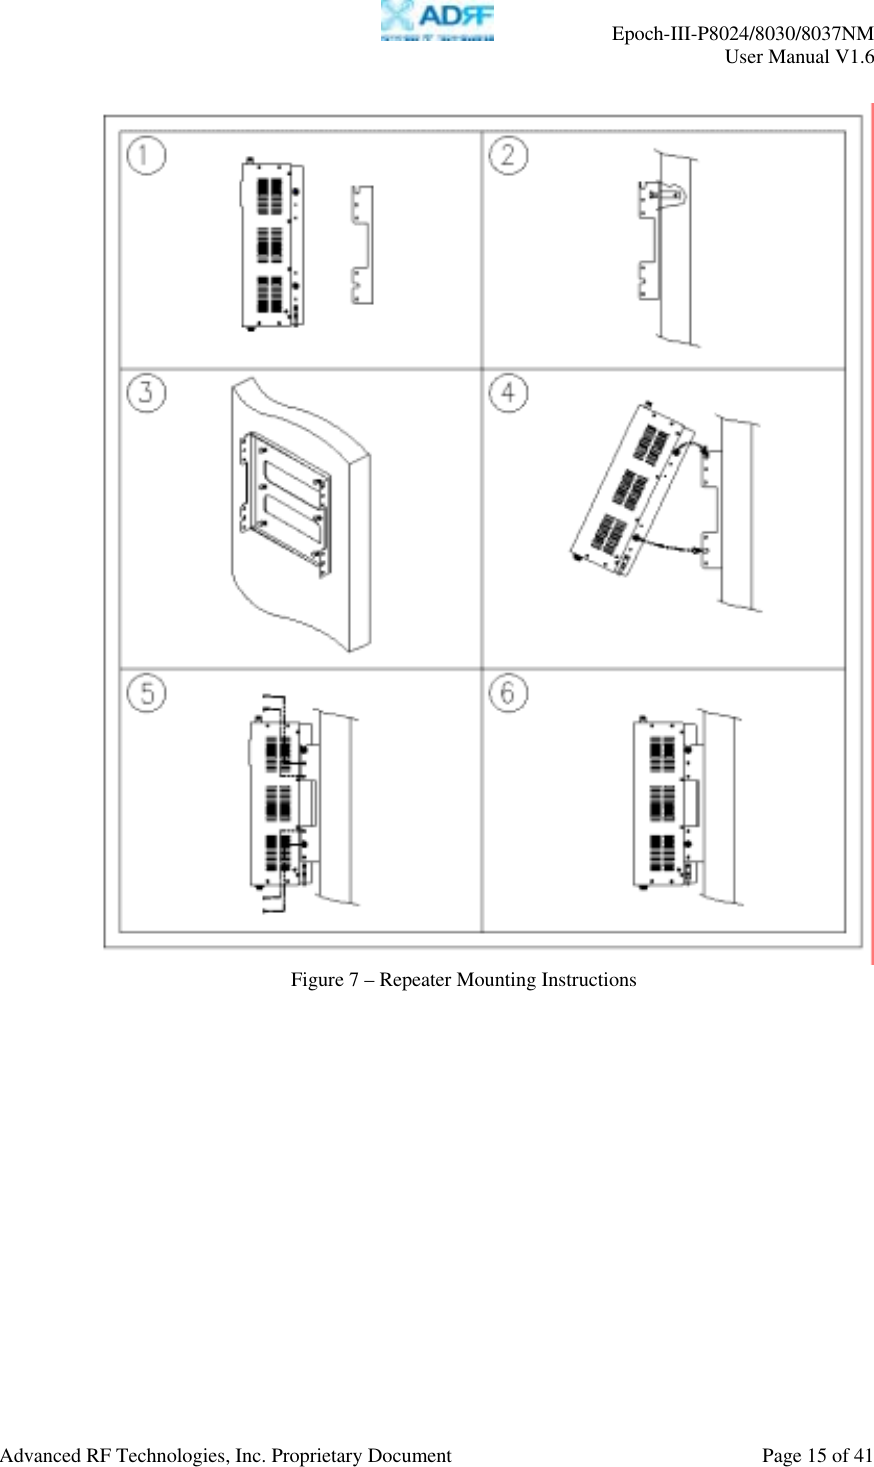     Epoch-III-P8024/8030/8037NM  User Manual V1.6  Advanced RF Technologies, Inc. Proprietary Document  Page 15 of 41   Figure 7 – Repeater Mounting Instructions 